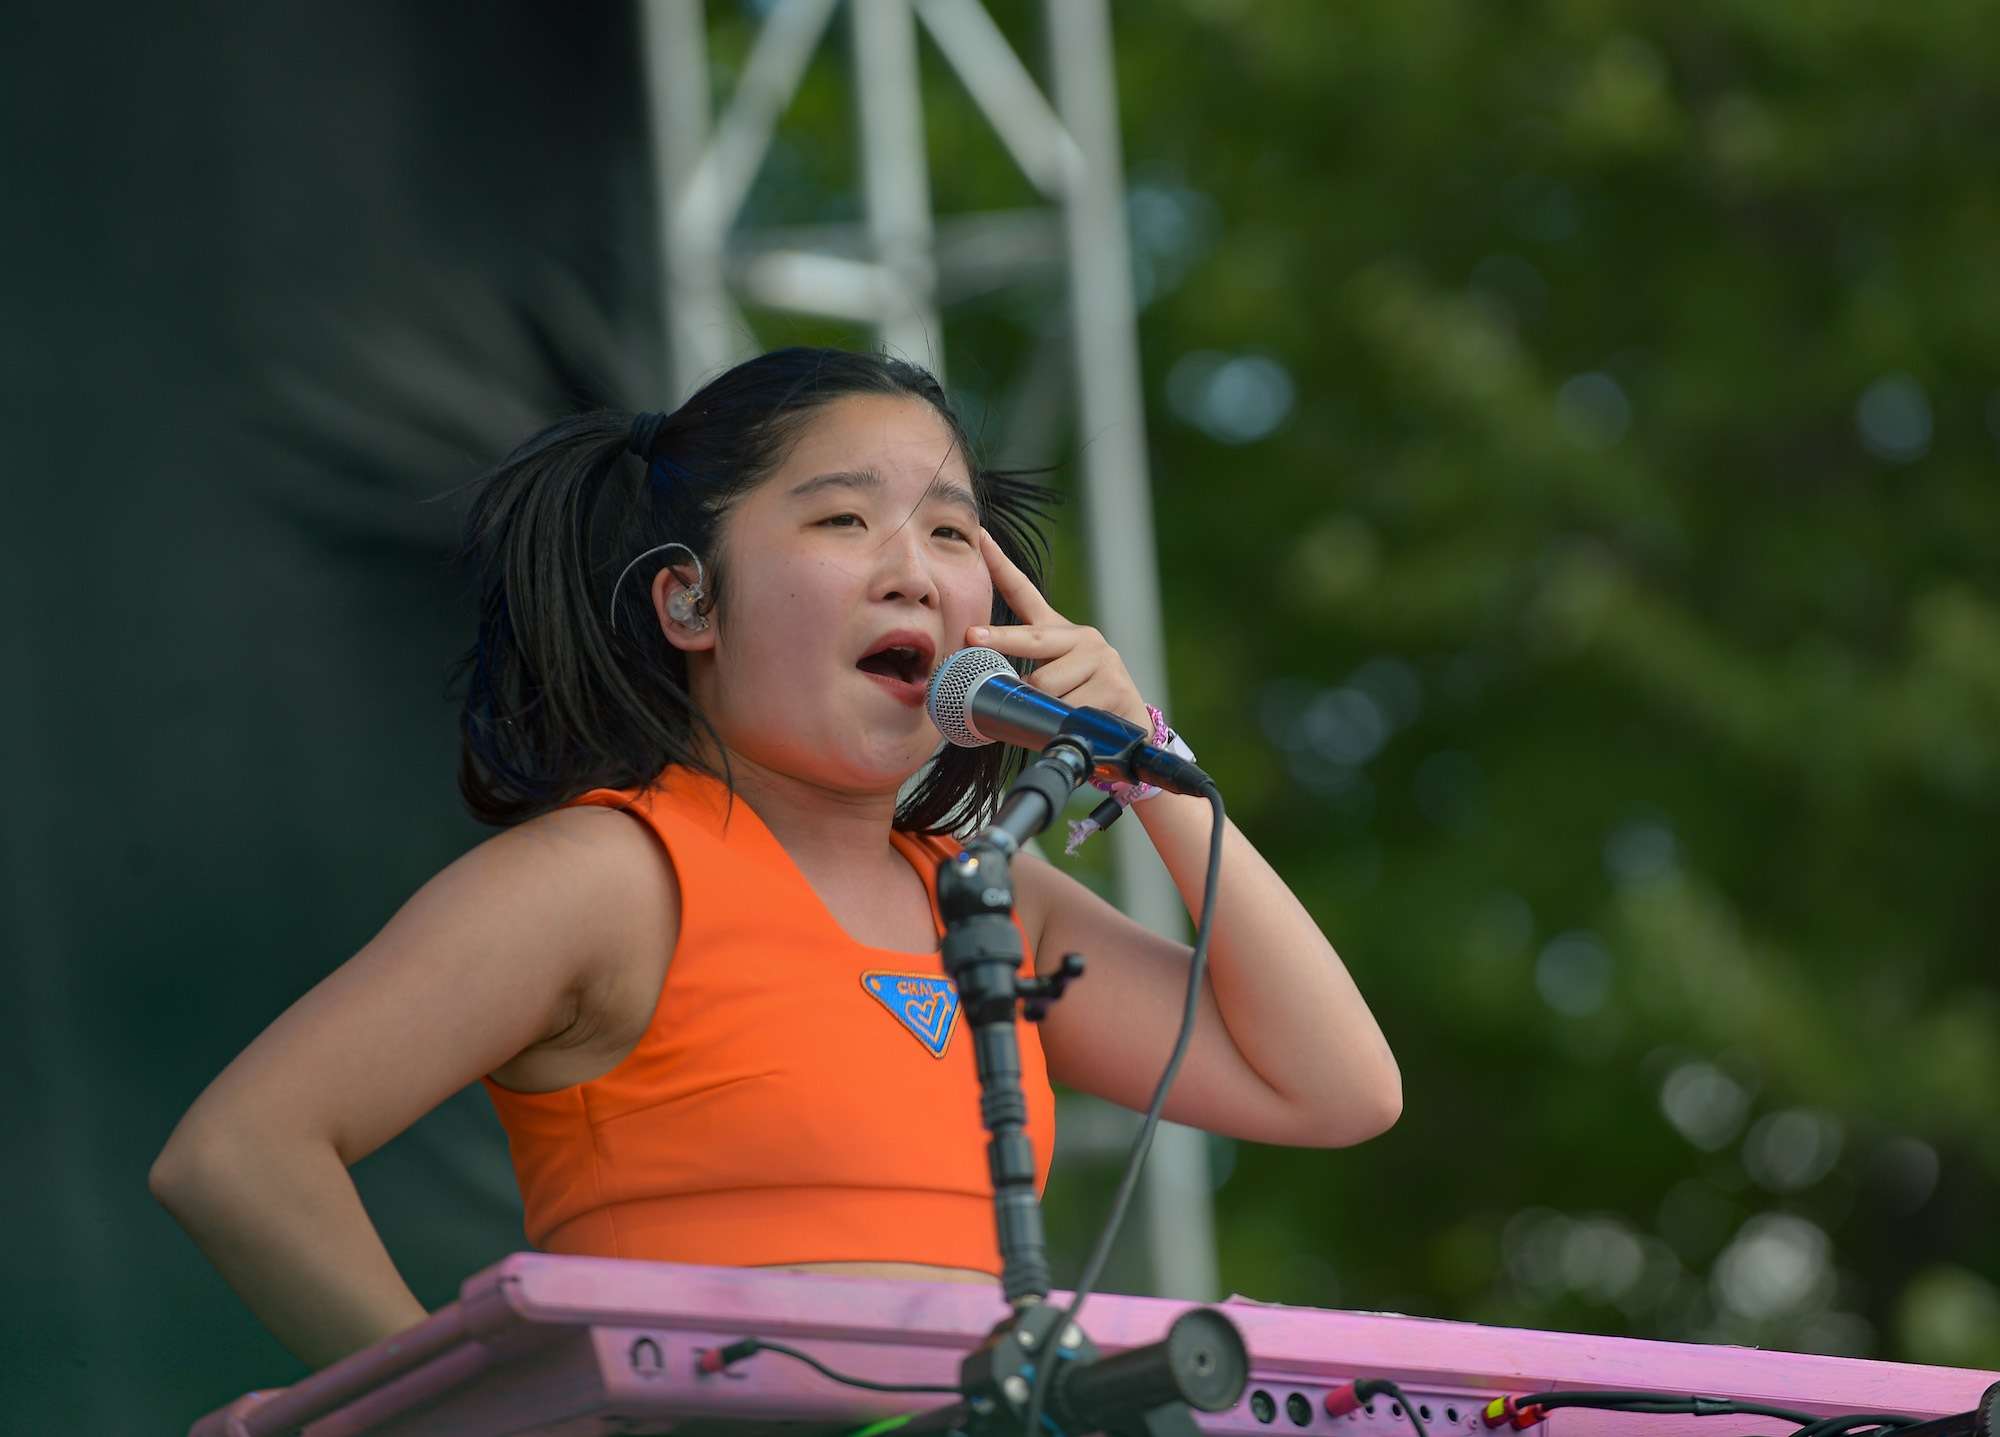 Chai Live at Pitchfork [GALLERY] 9